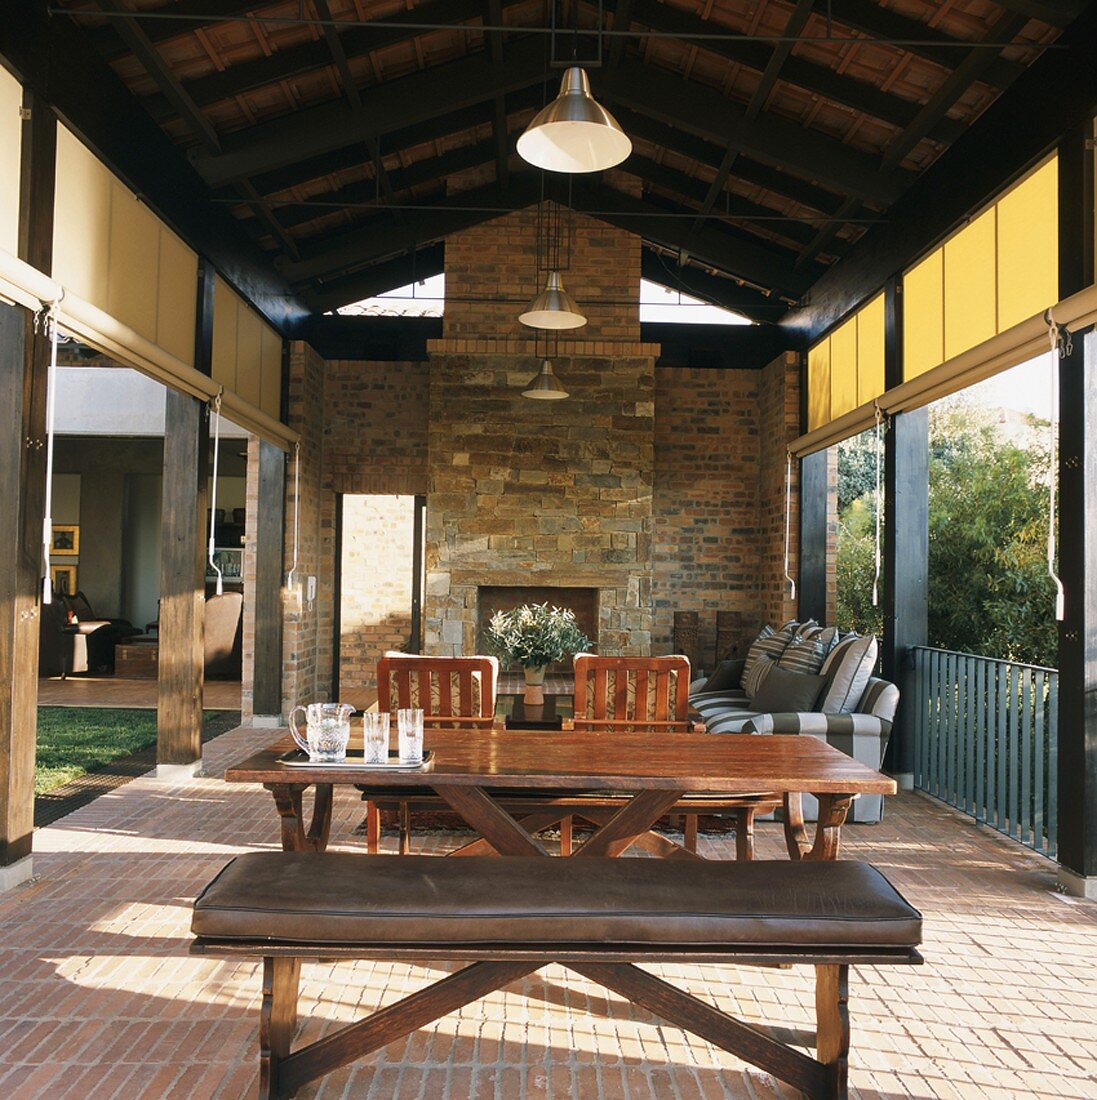 Outdoor living-dining room - terrace with rustic fireplace under exposed roof structure and roller sun screens on either side